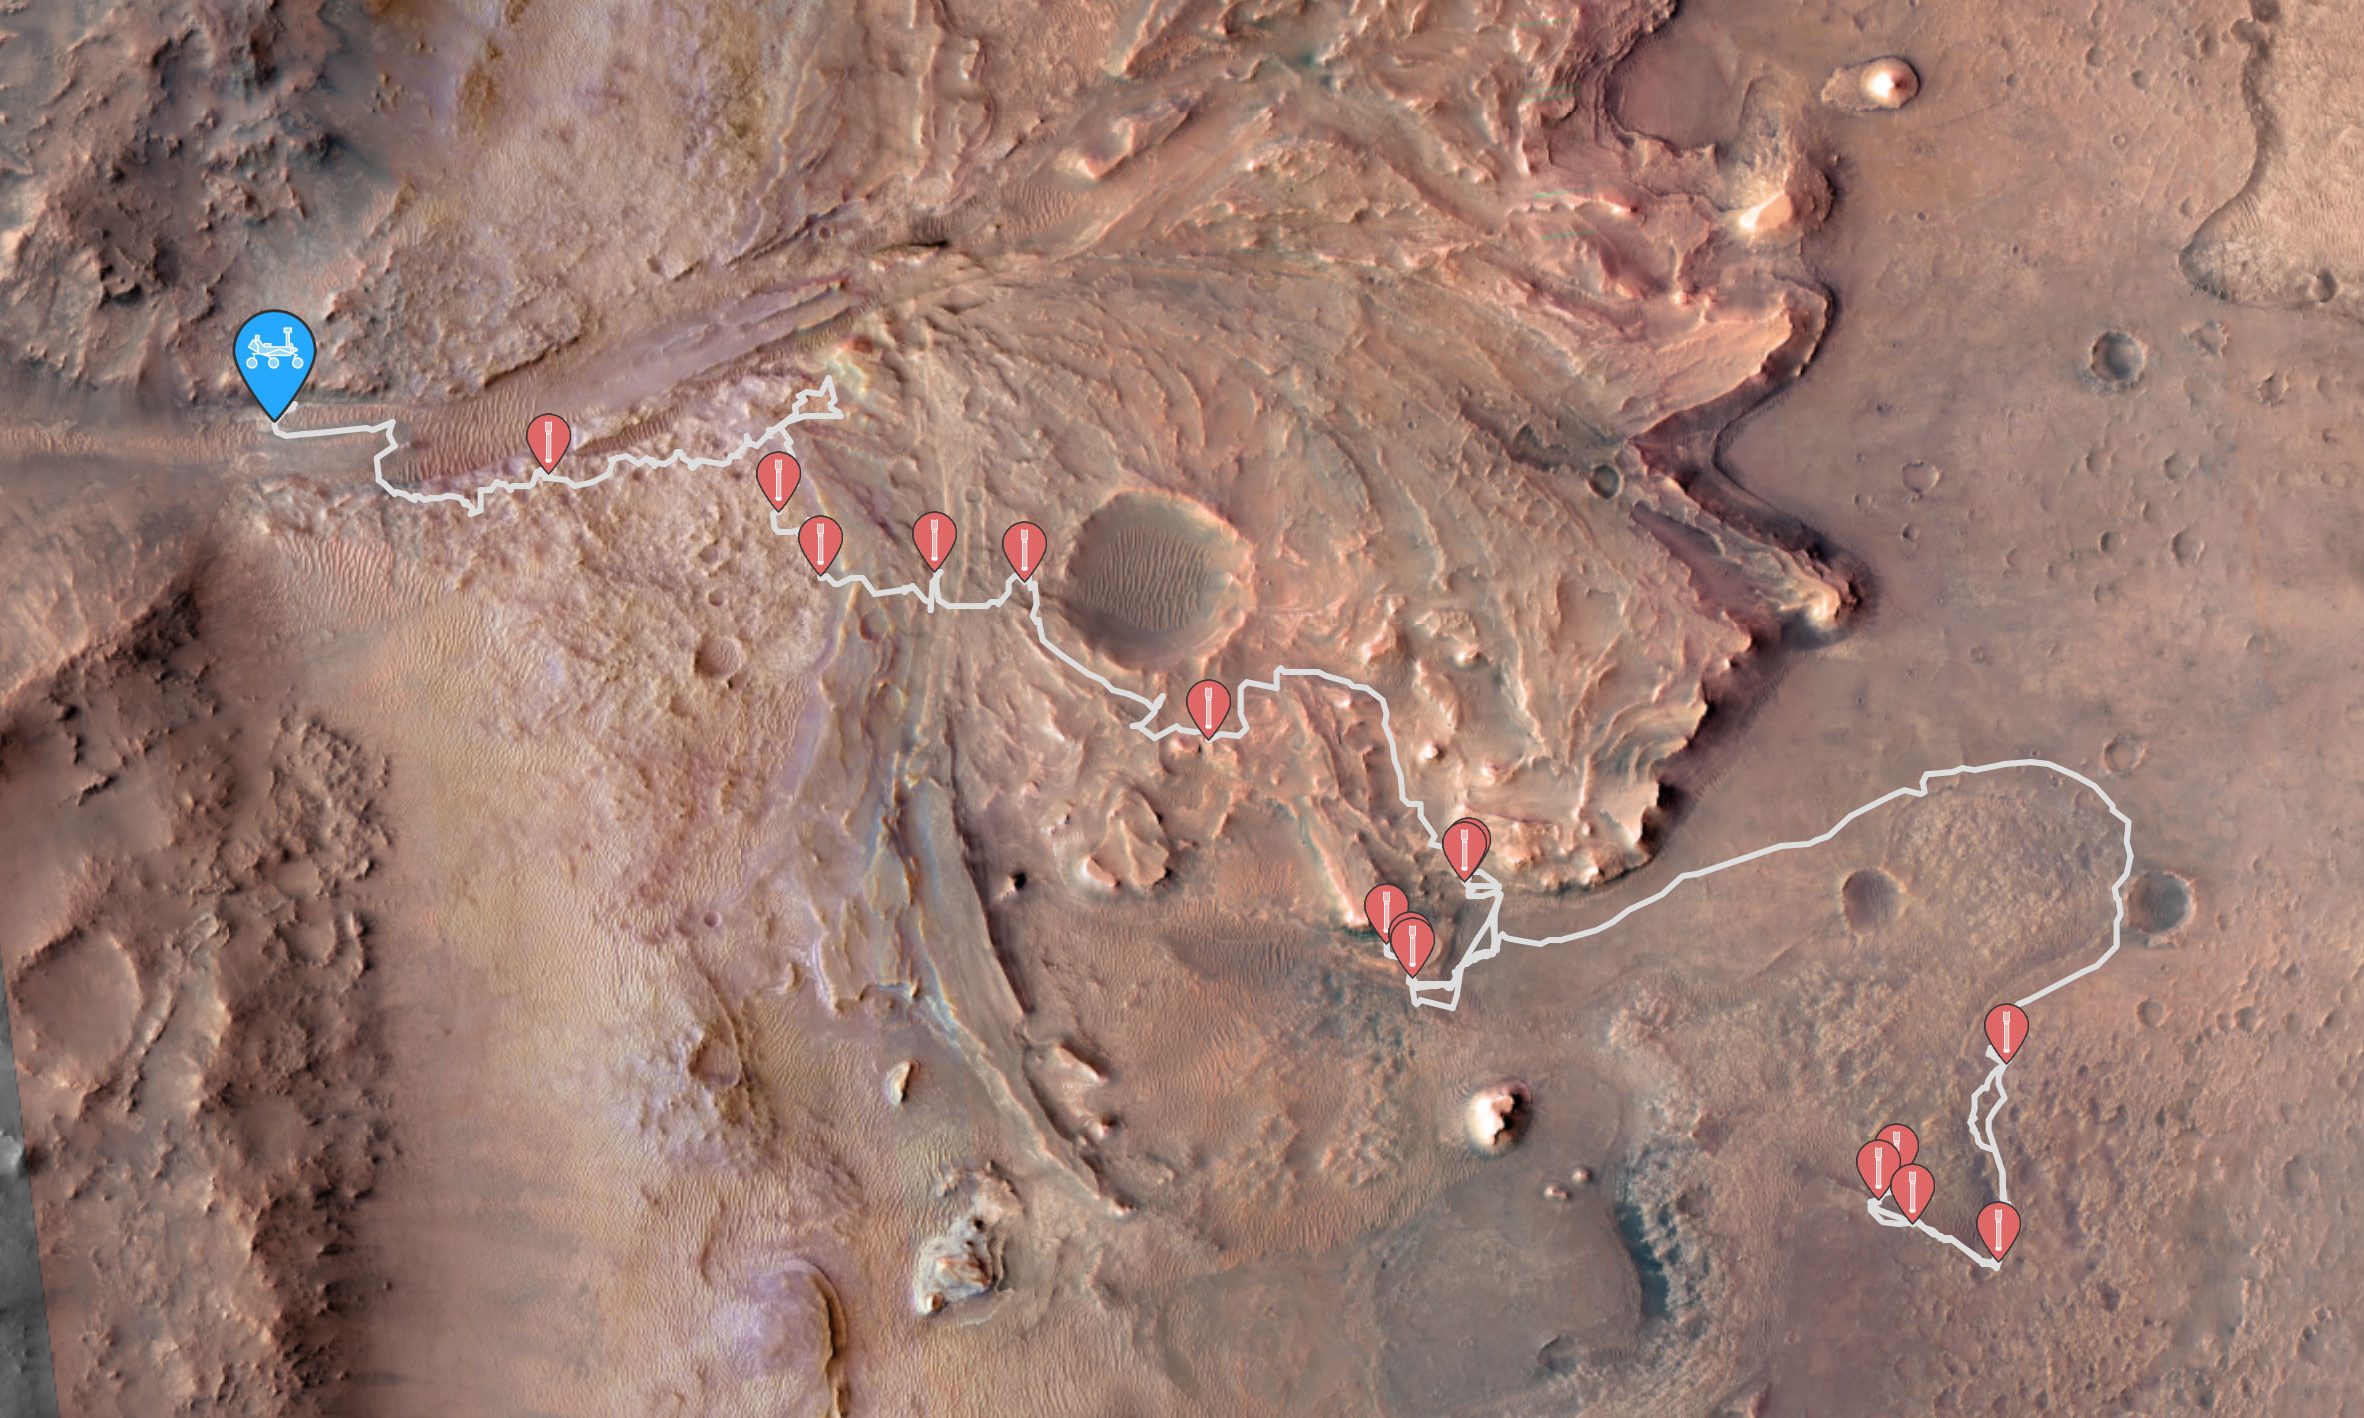 Location map of Mars with sample tube and Perseverance rover icons to depict the location of each object, along with a traverse path of Perseverance rover's drive.